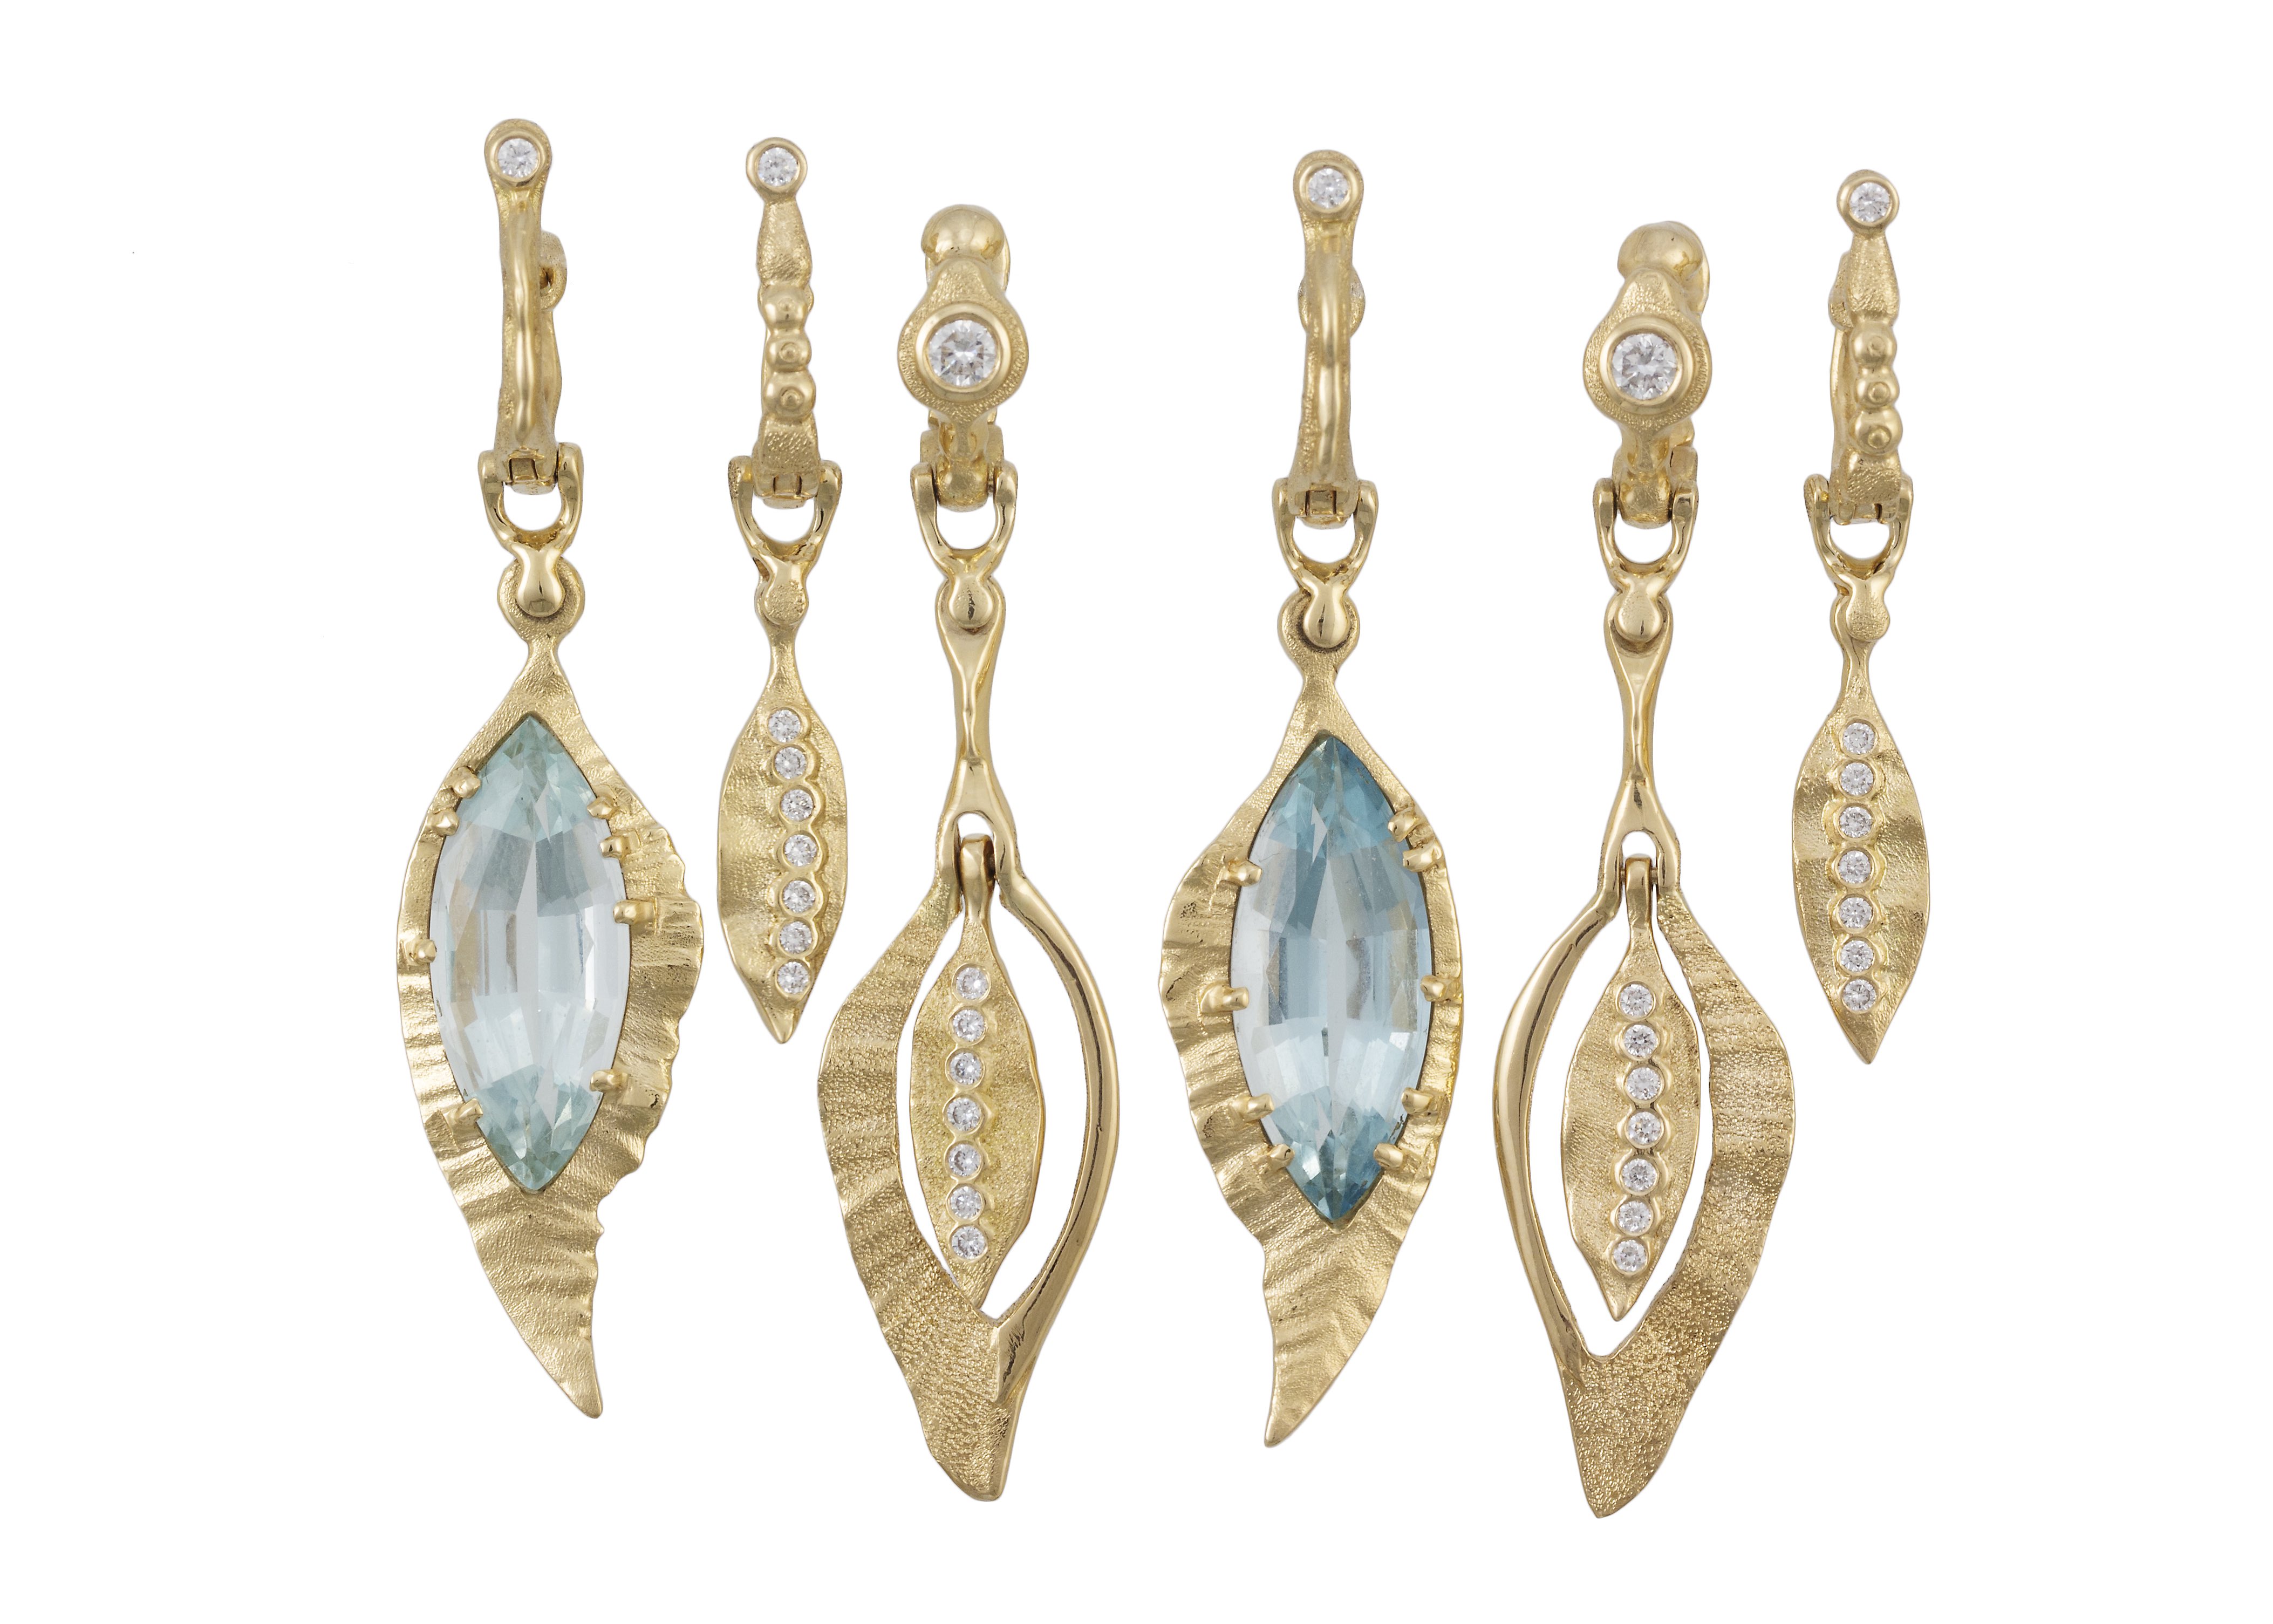 Various Feathers Earrings by Audrius Krulis. Yellow Gold, White Diamonds and Aquamarine